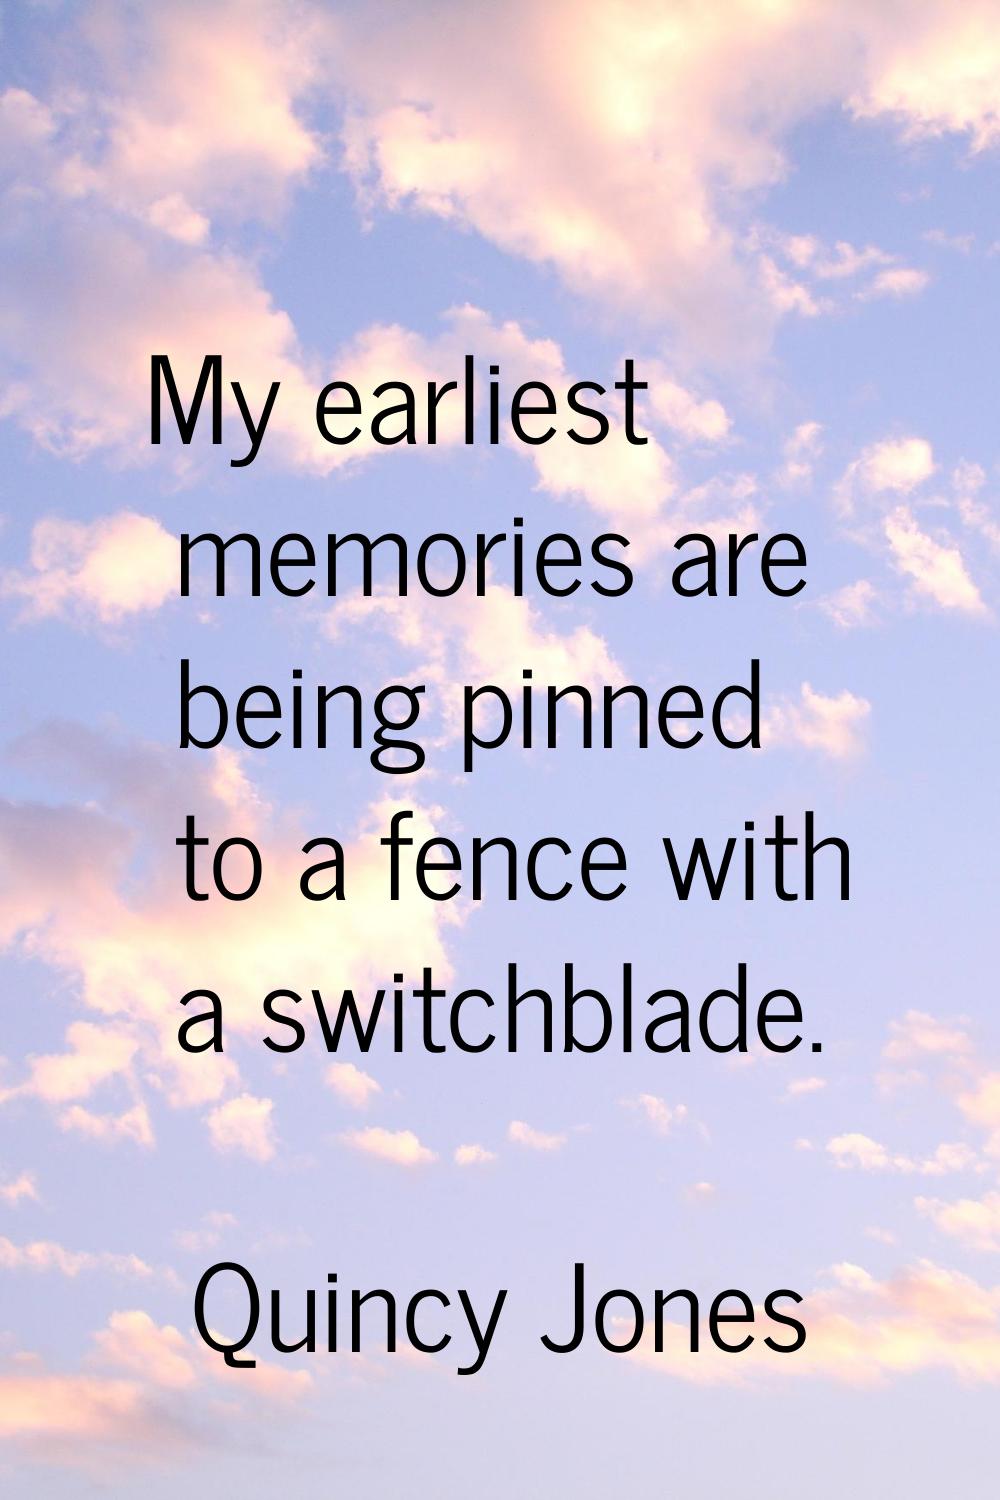 My earliest memories are being pinned to a fence with a switchblade.